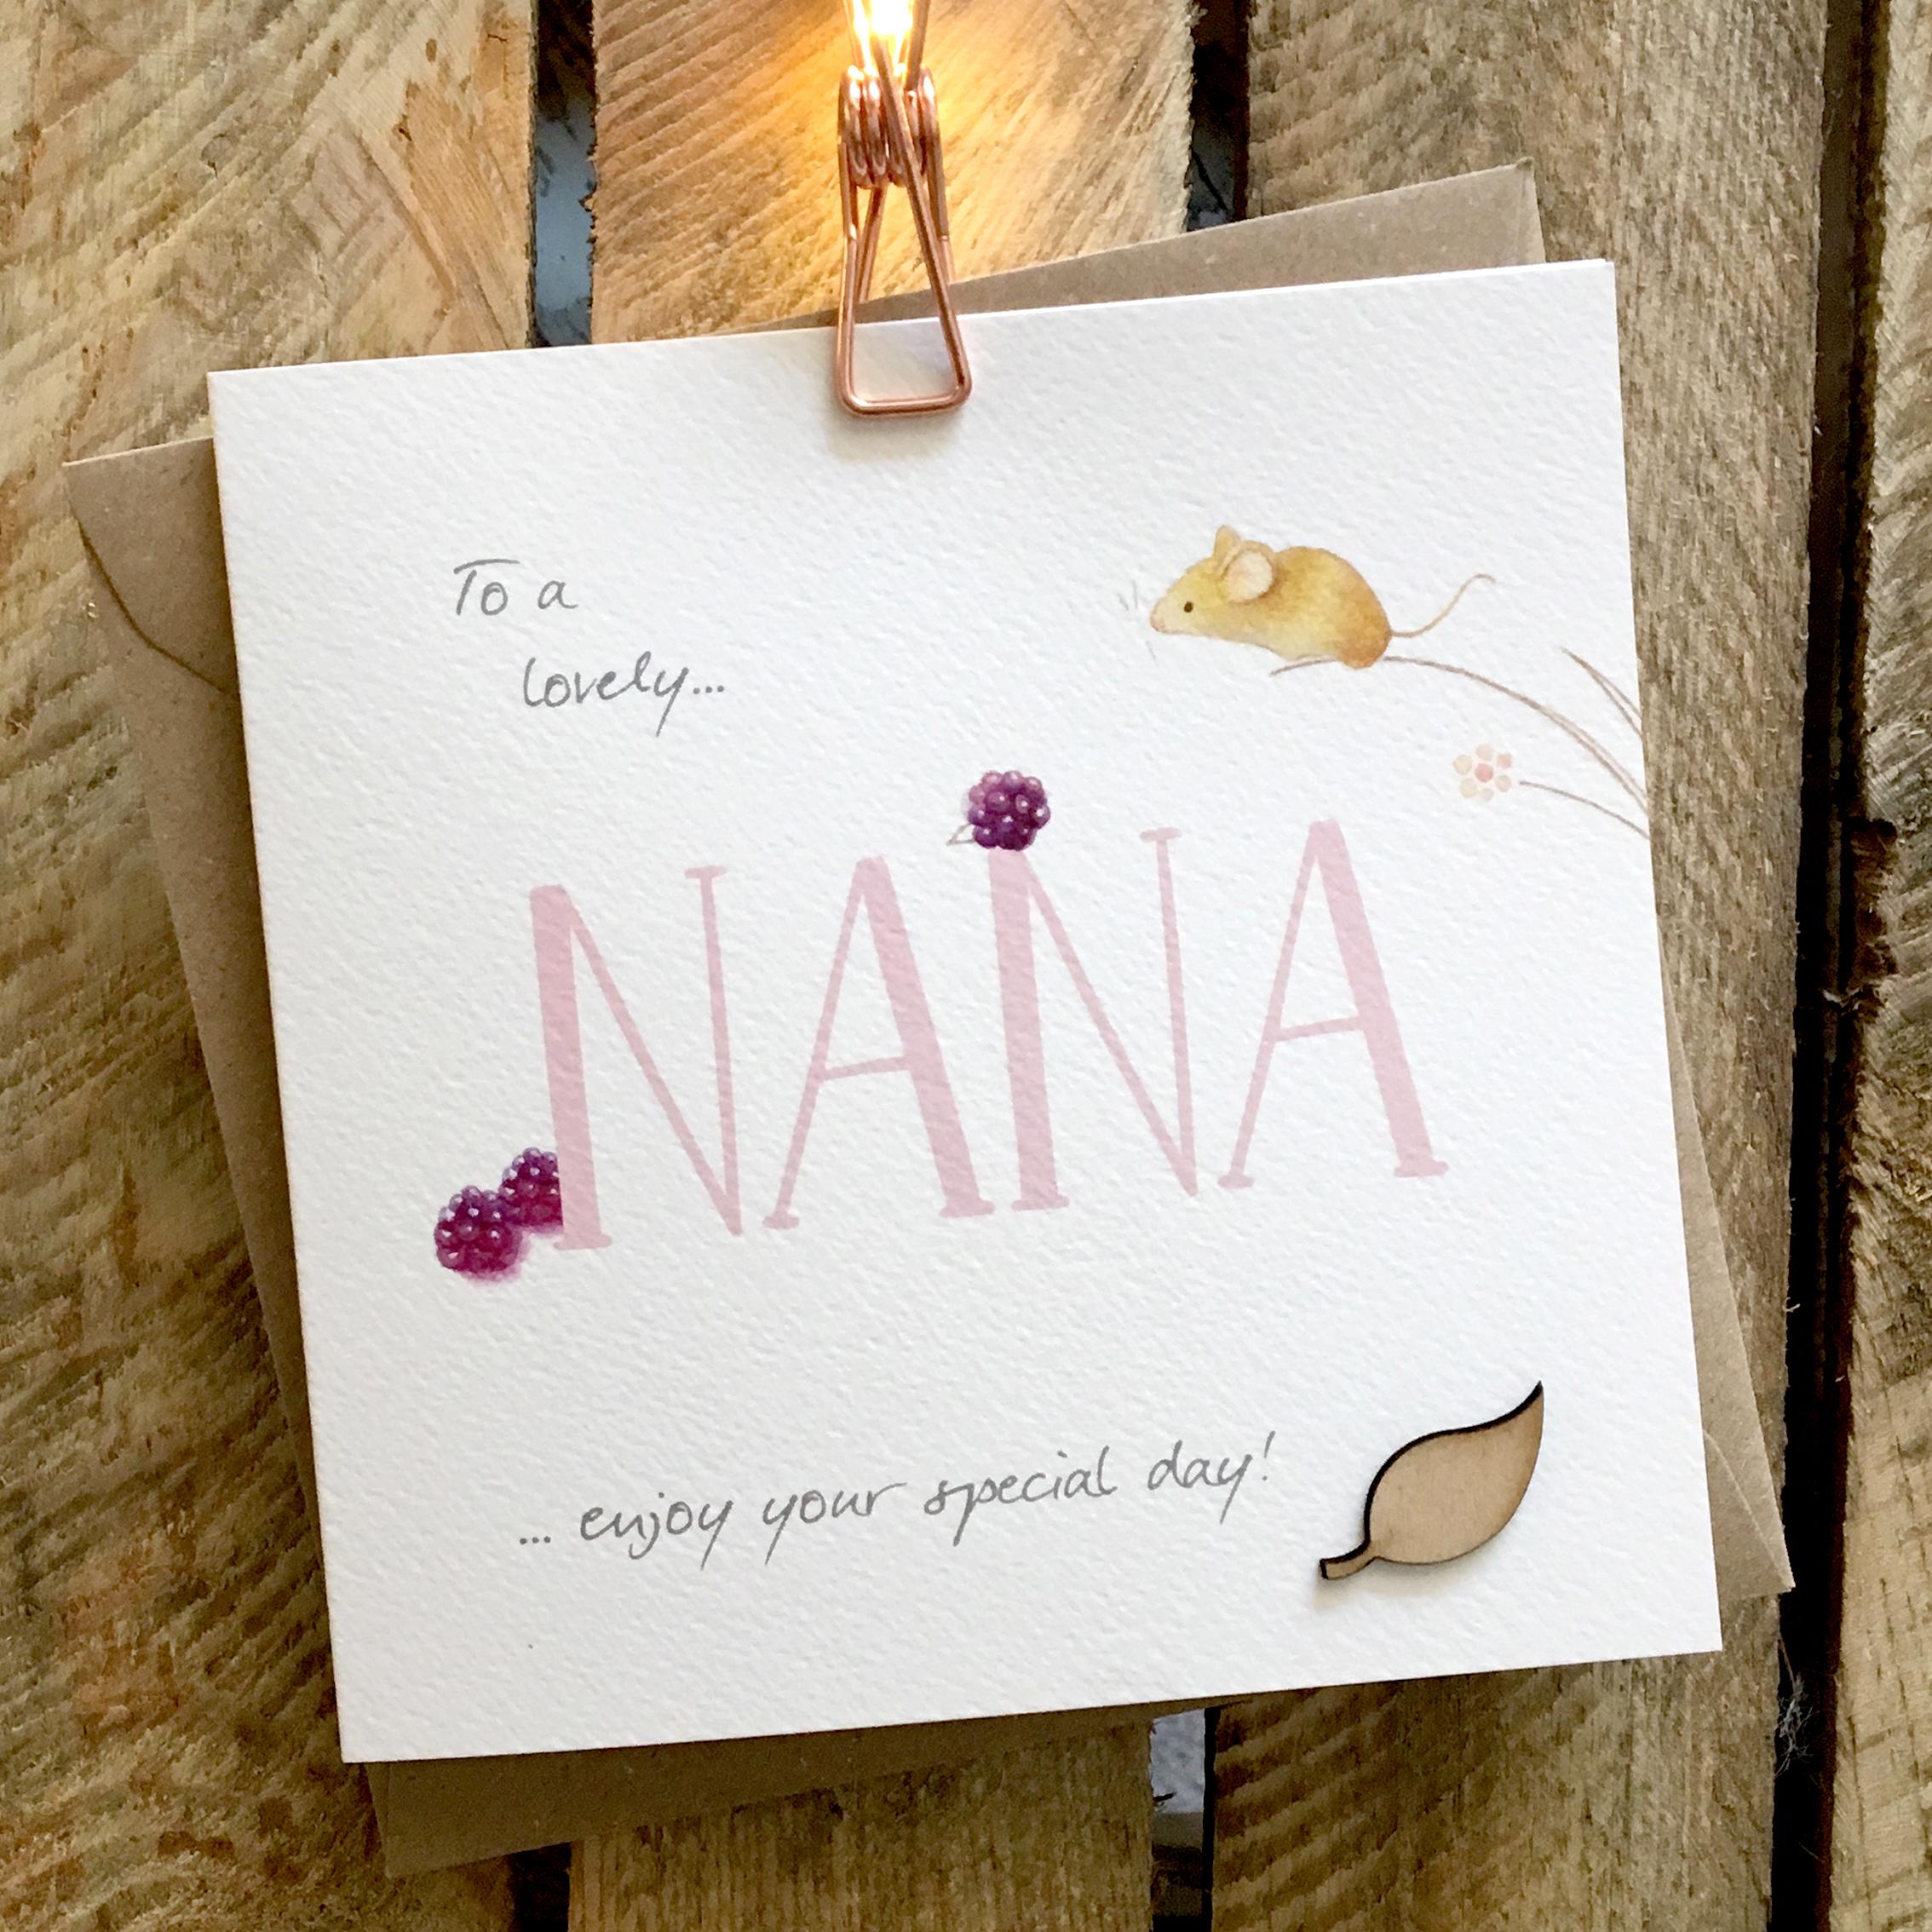 Ginger Betty Lovely Nana Enjoy Your Special Day Card